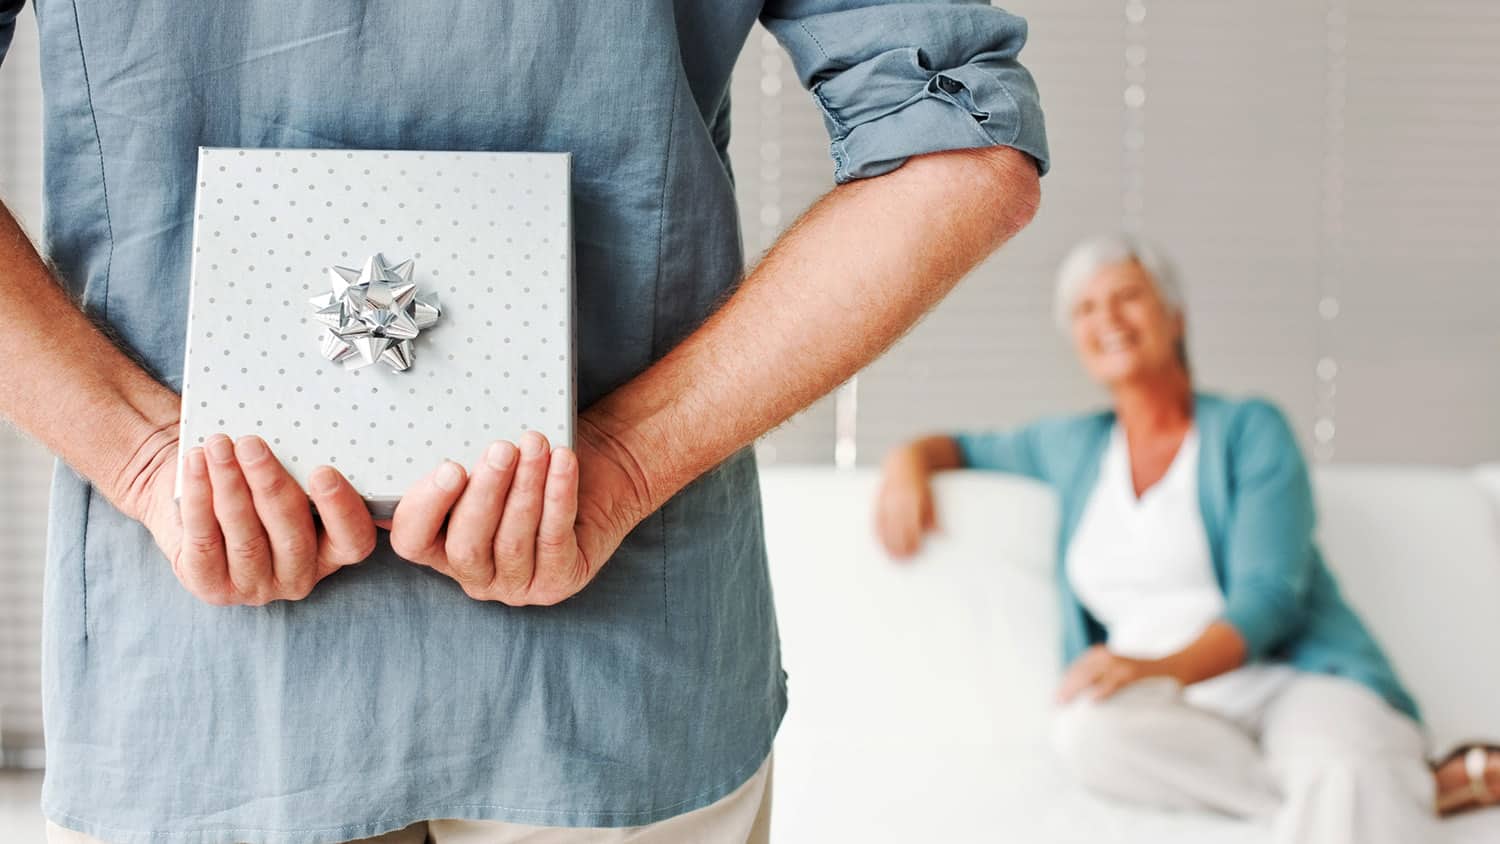 6 Creative Birthday Gifts for Women Over 60 That Won't Clutter Up the House